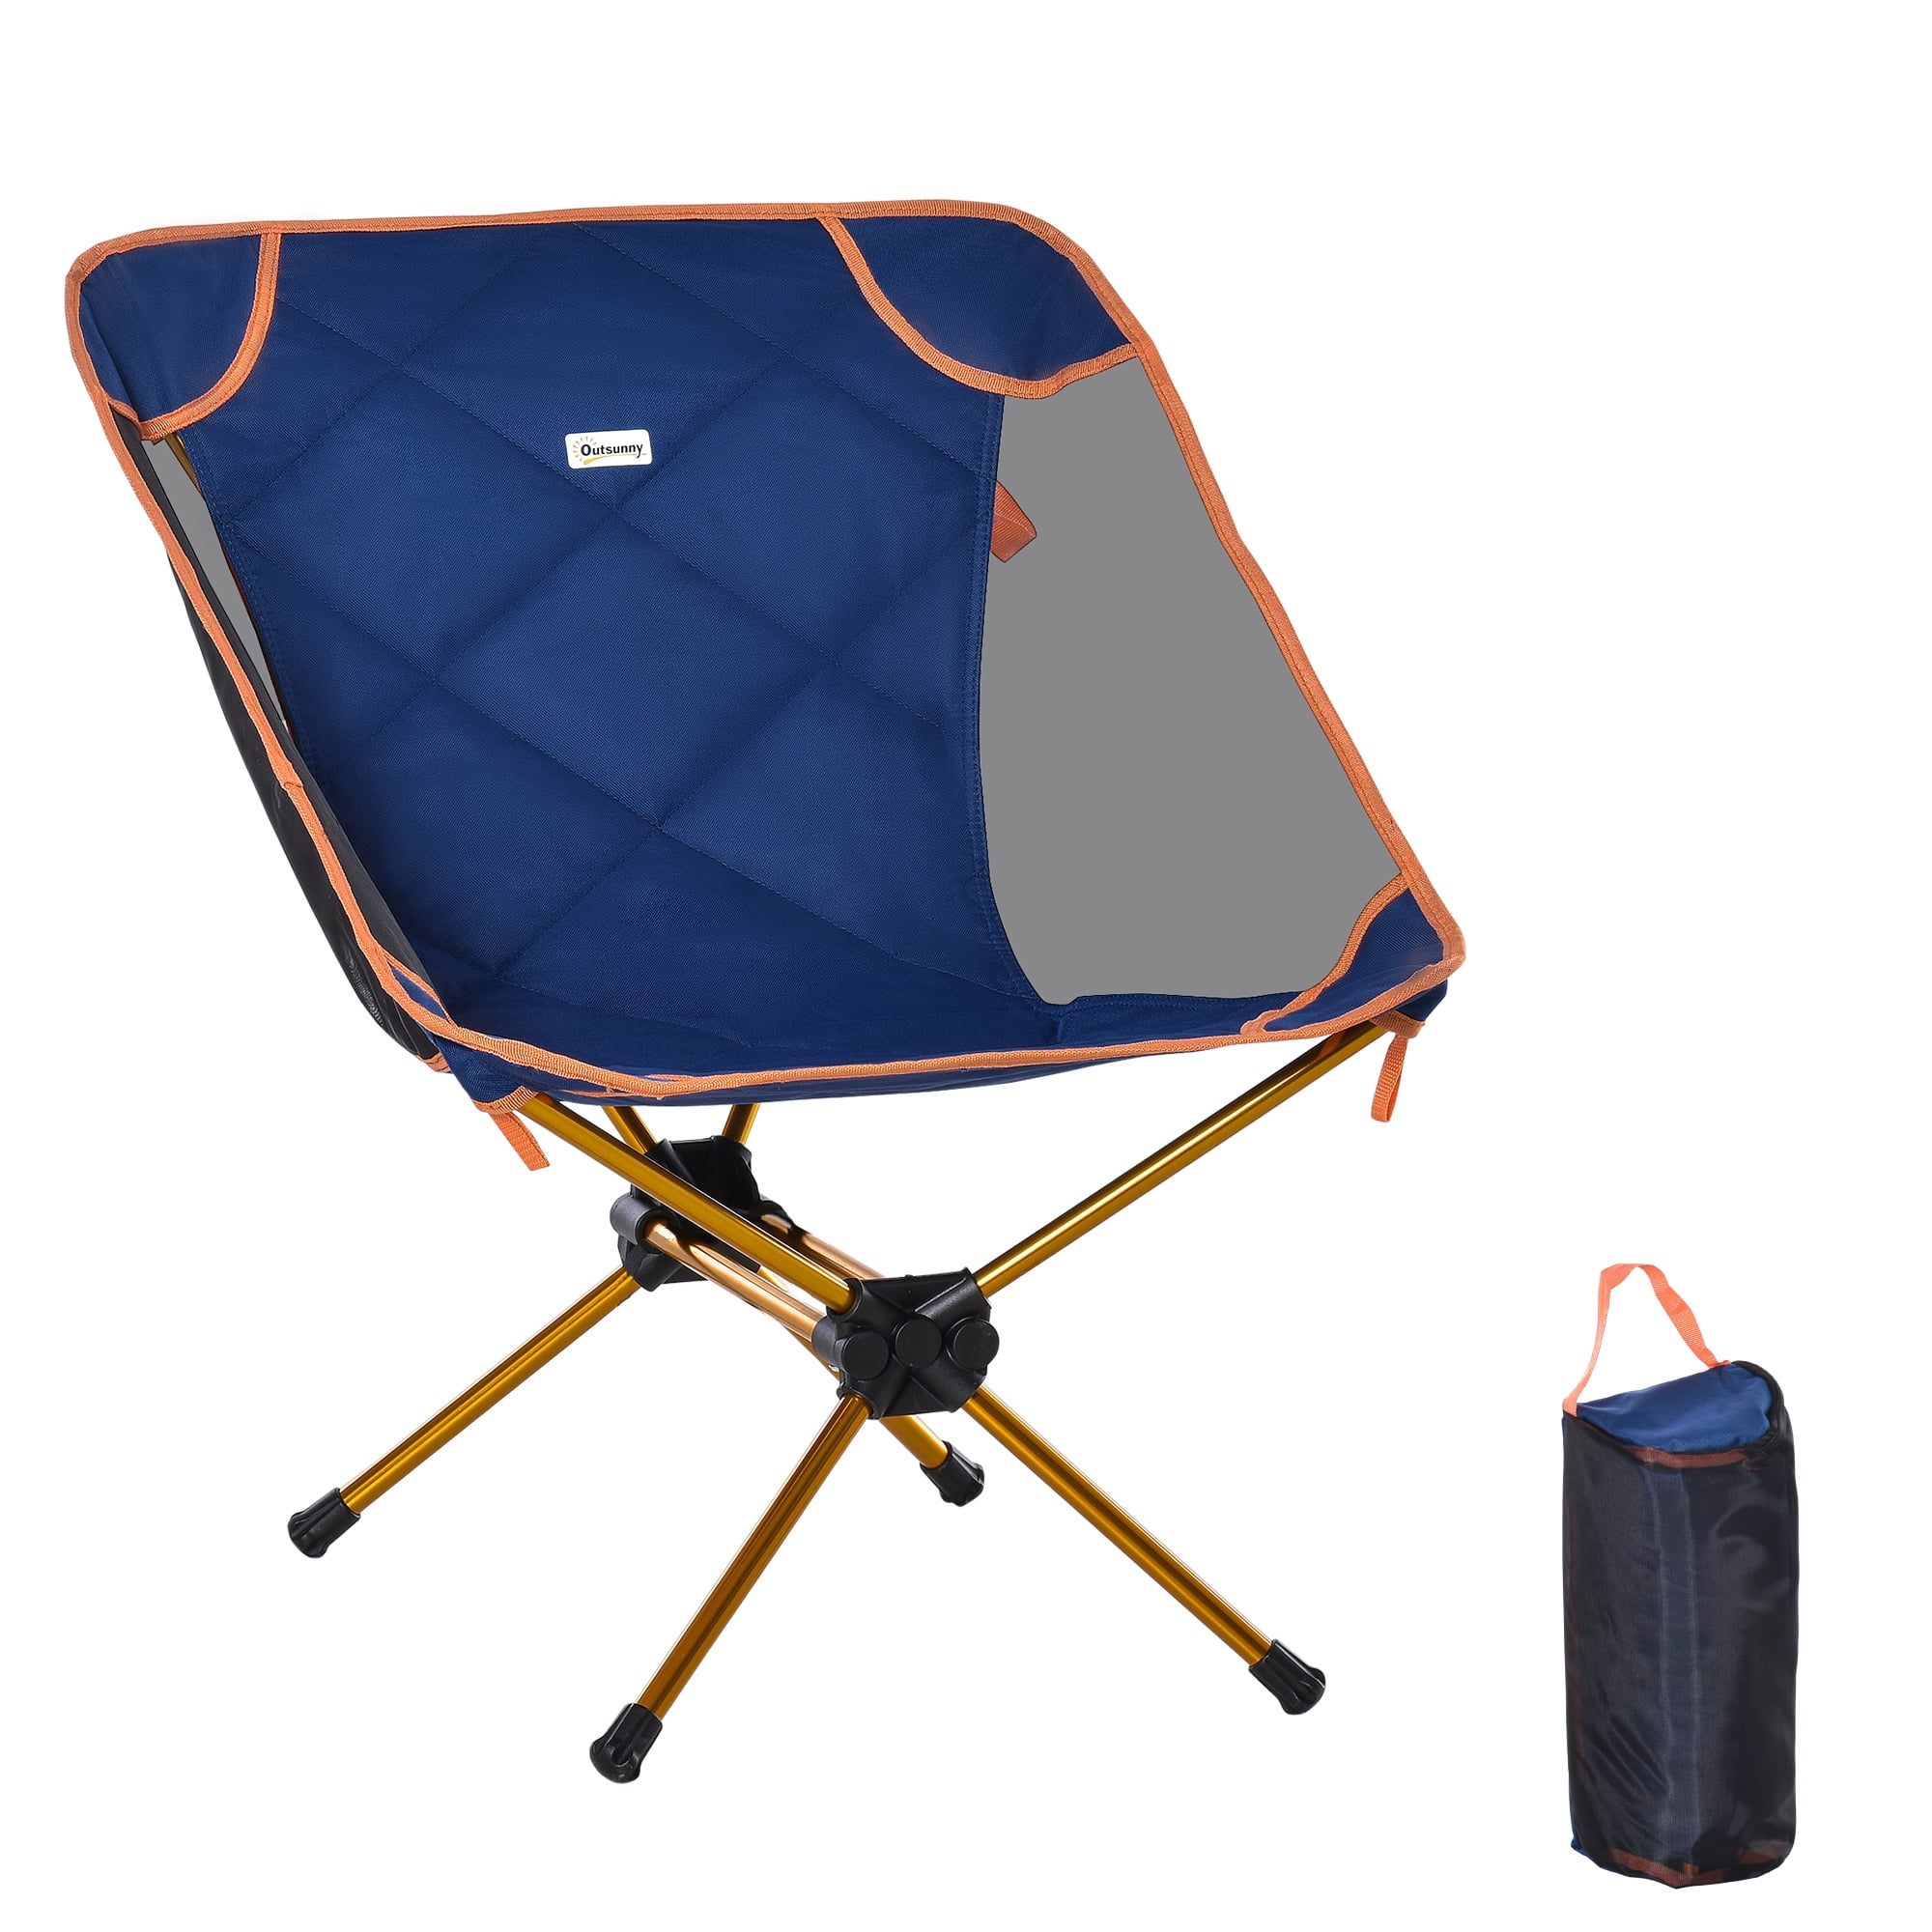 Creatice Small Collapsible Beach Chair 